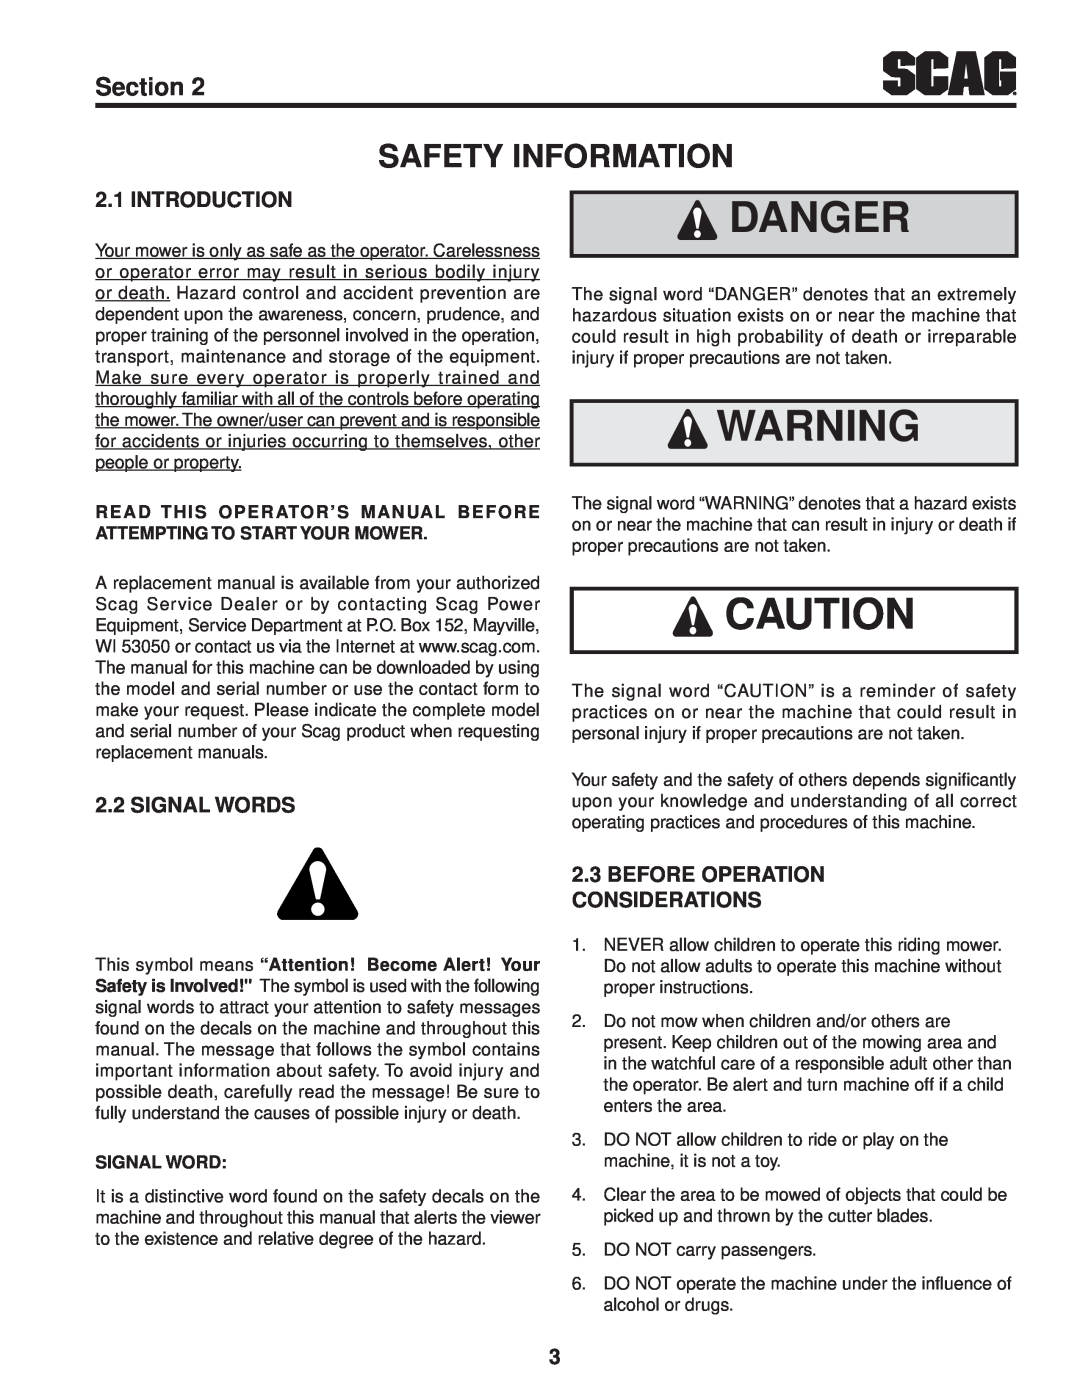 Scag Power Equipment STT61V-31EFI-SS manual Danger, Safety Information, Introduction, Signal Words, Section 